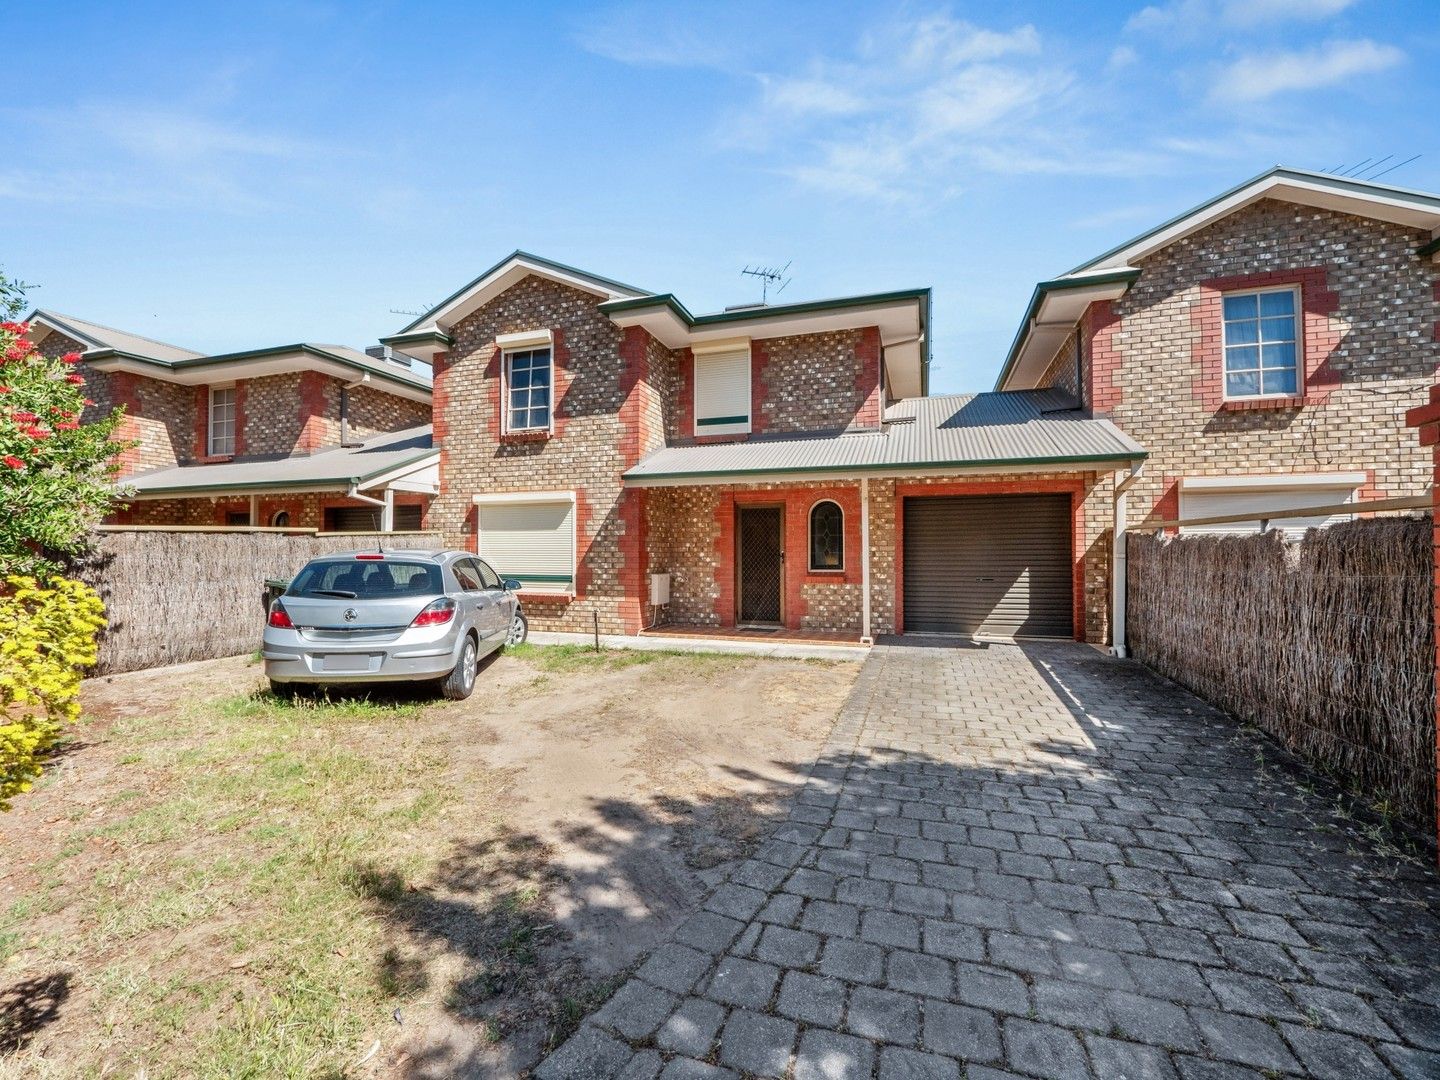 3 bedrooms Townhouse in 14/36 Eighth Street GAWLER SOUTH SA, 5118